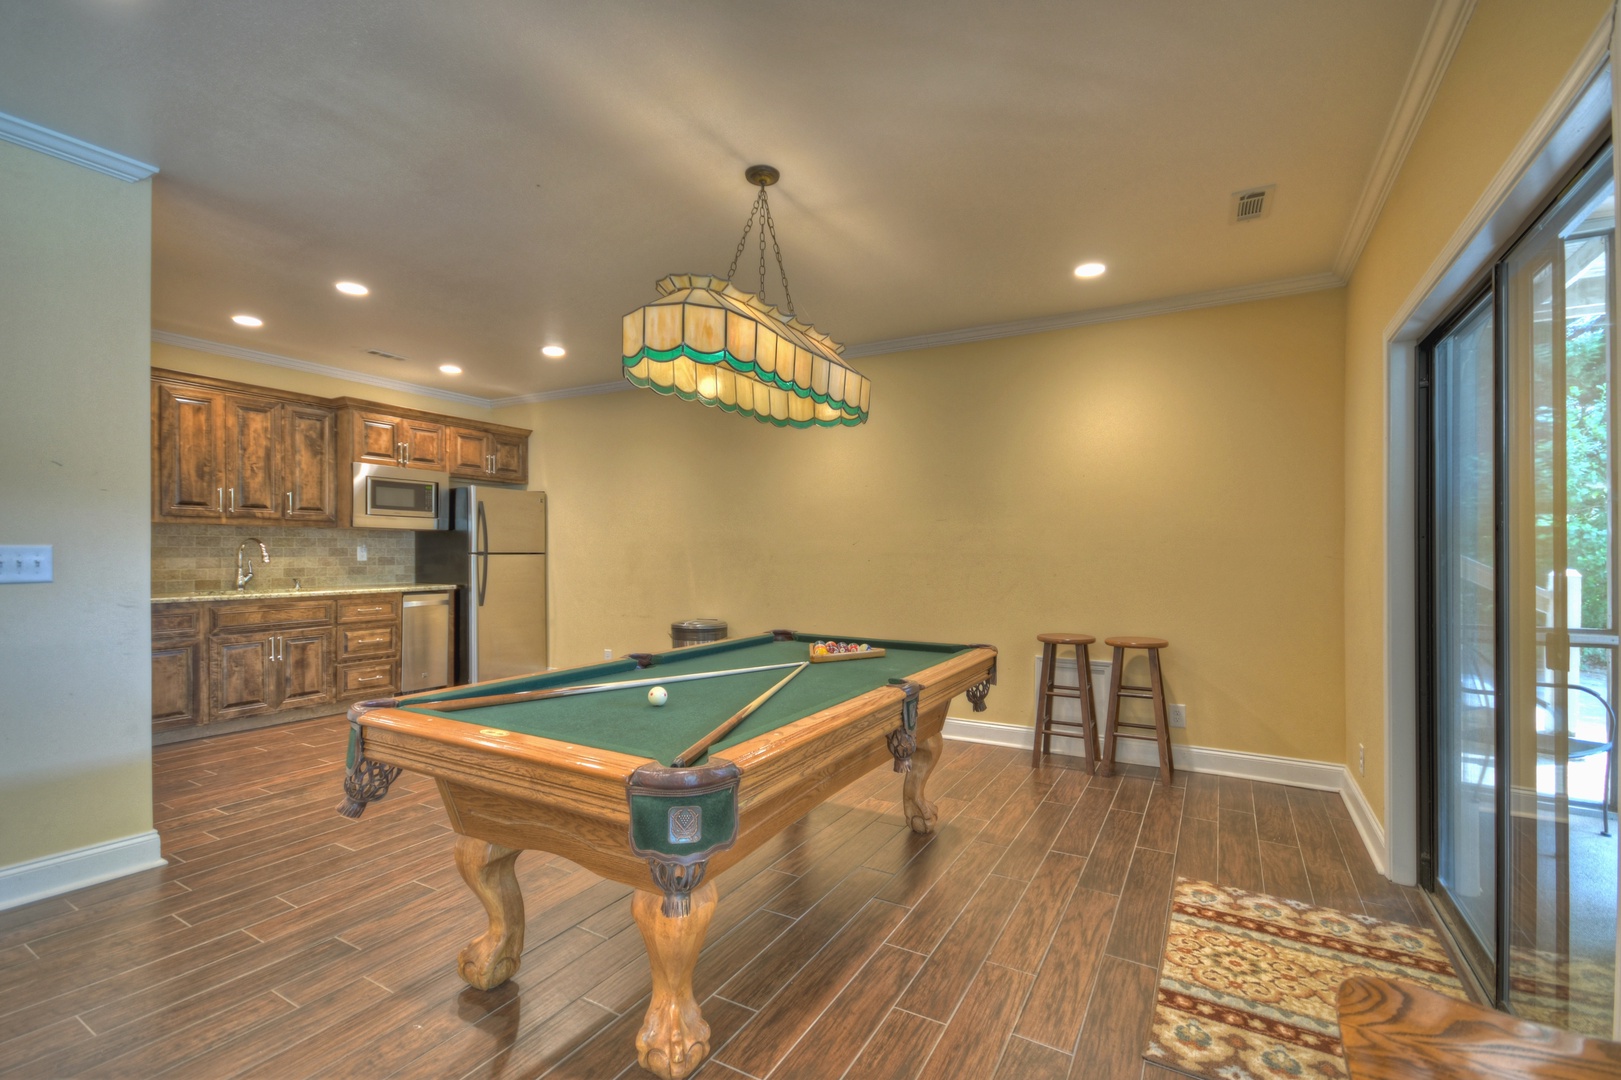 Jump Right In- Lower level game area with a pool table